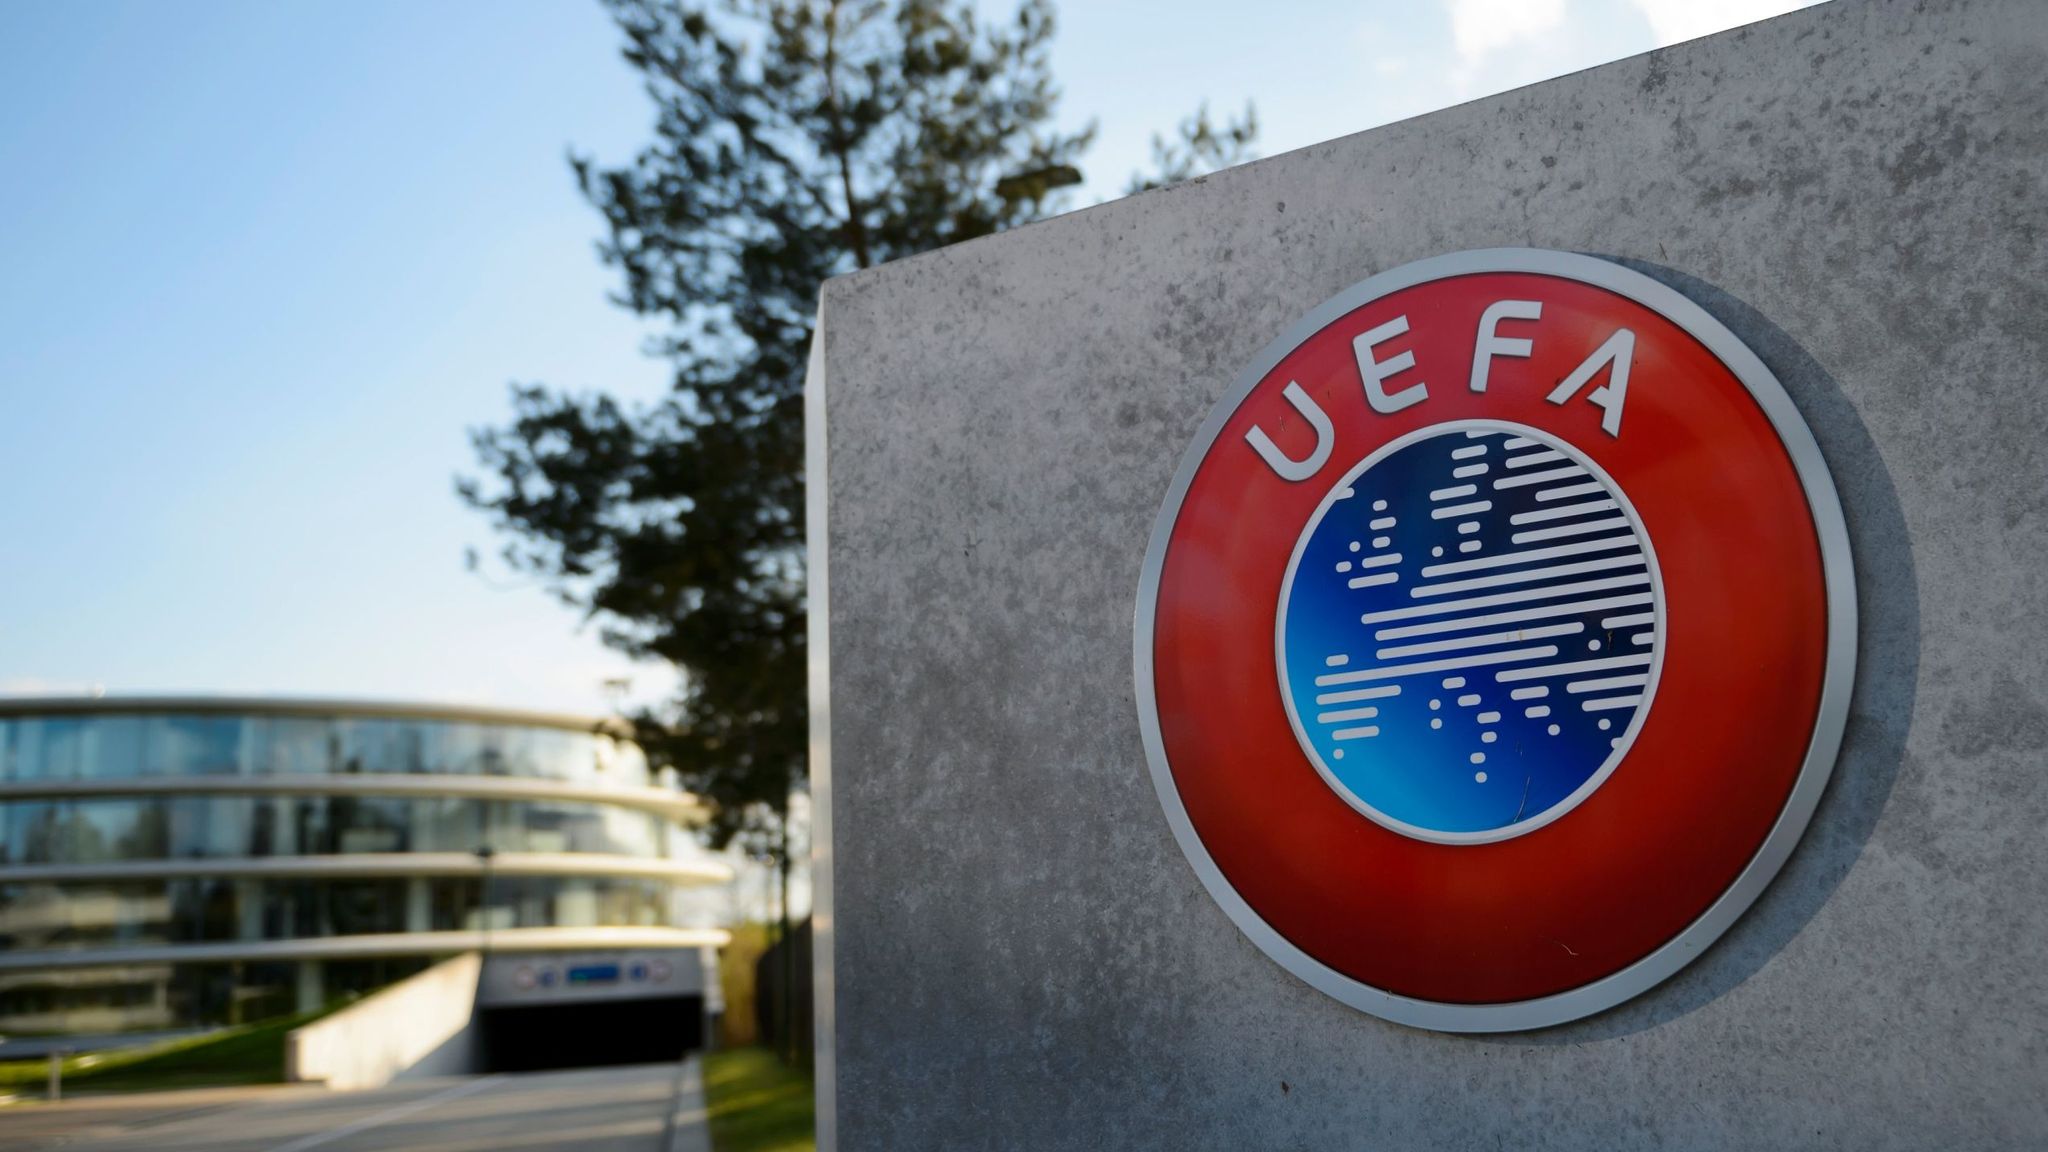 BREAKING: UEFA terminate ‘away goal’ rule in all competitions from 2021-22 season